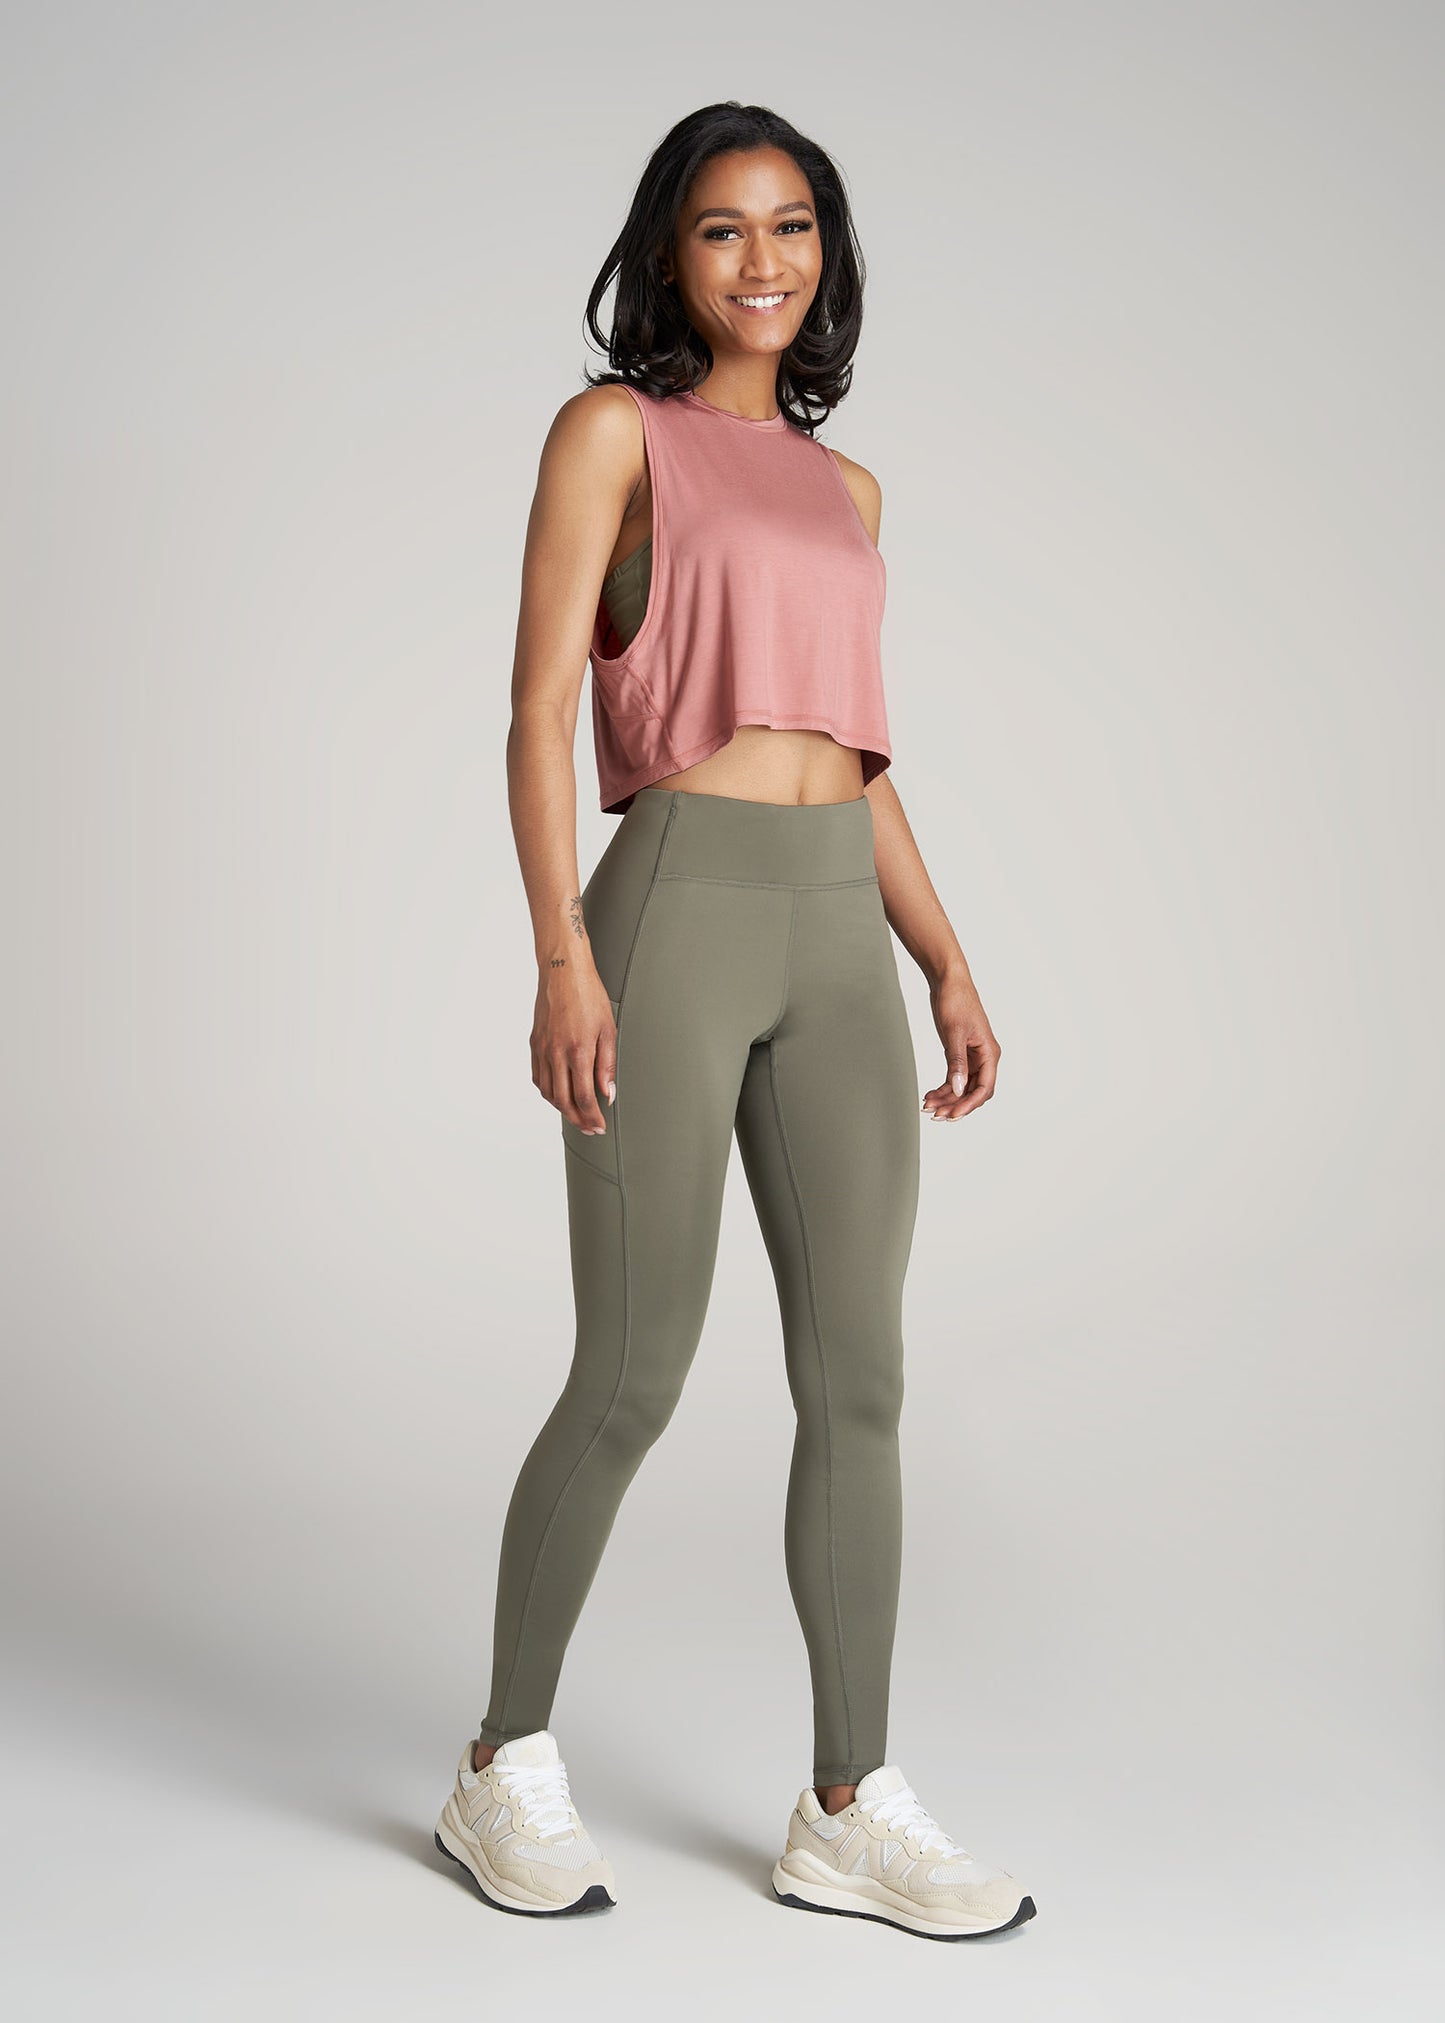 A tall woman wearing American Tall's Cropped Muscle Tank top in the color Clay Sunrise with olive green leggings.